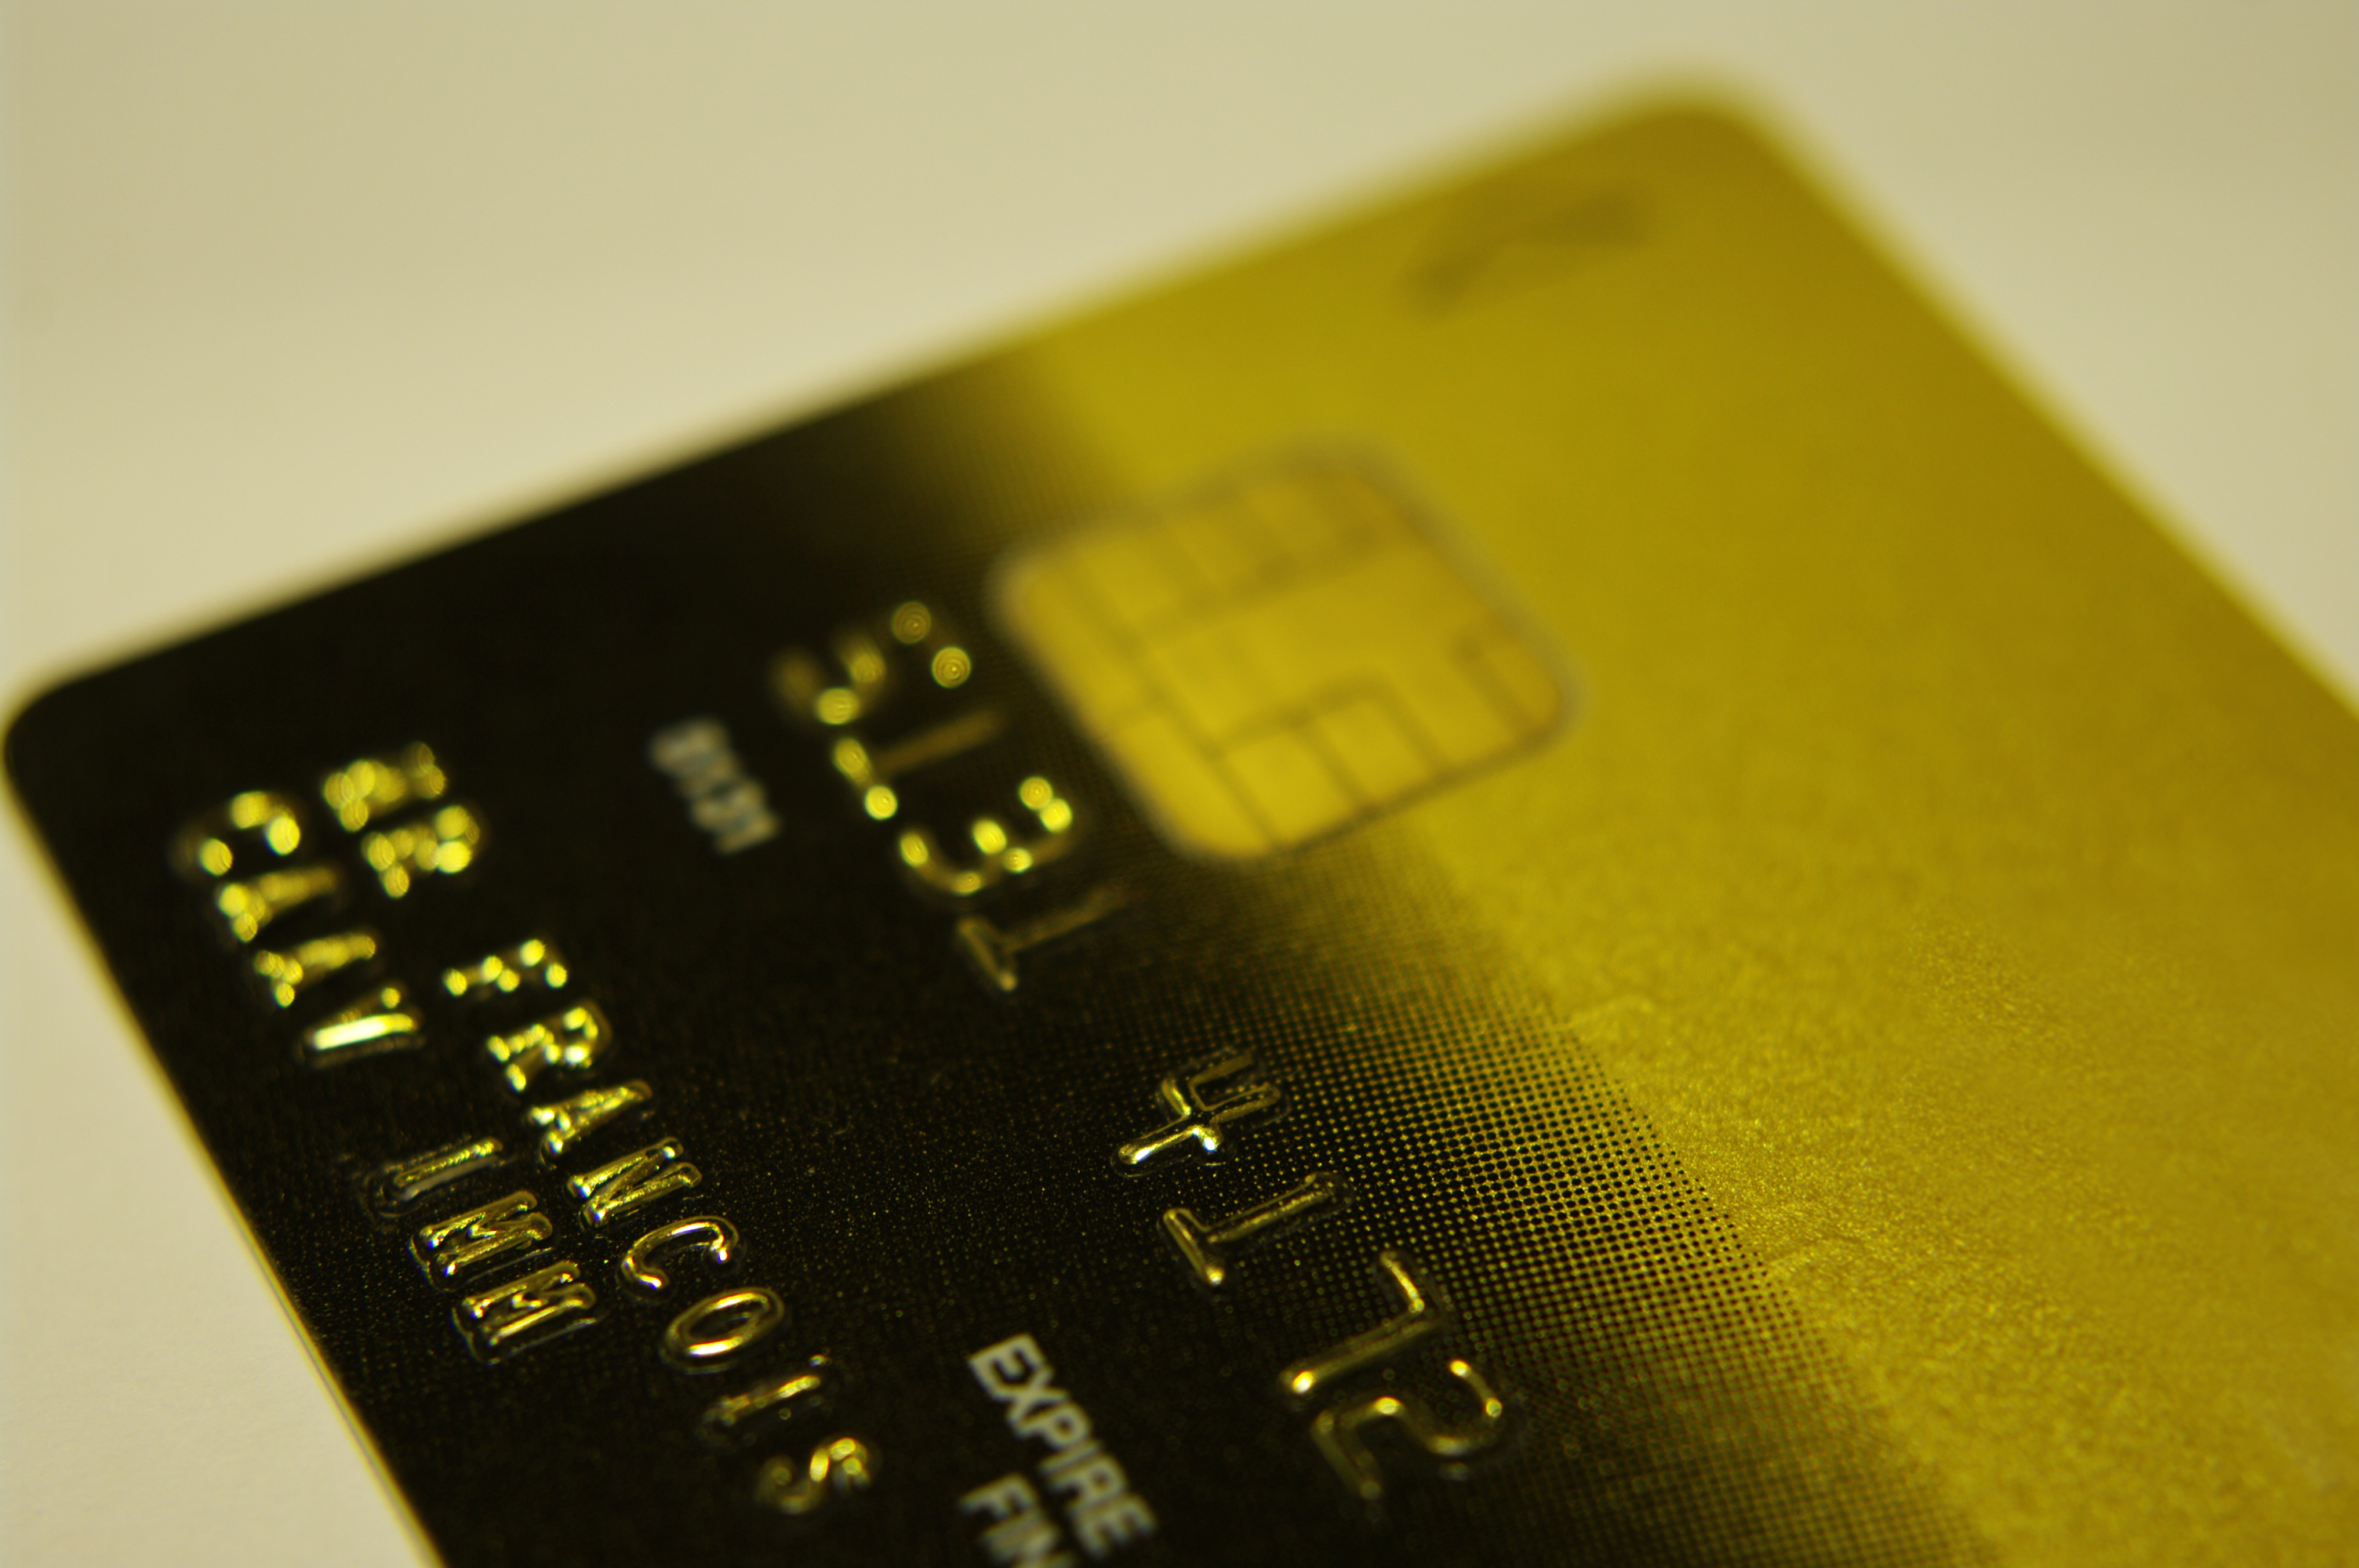 Know all about the features of the credit card. Source: Freerange.